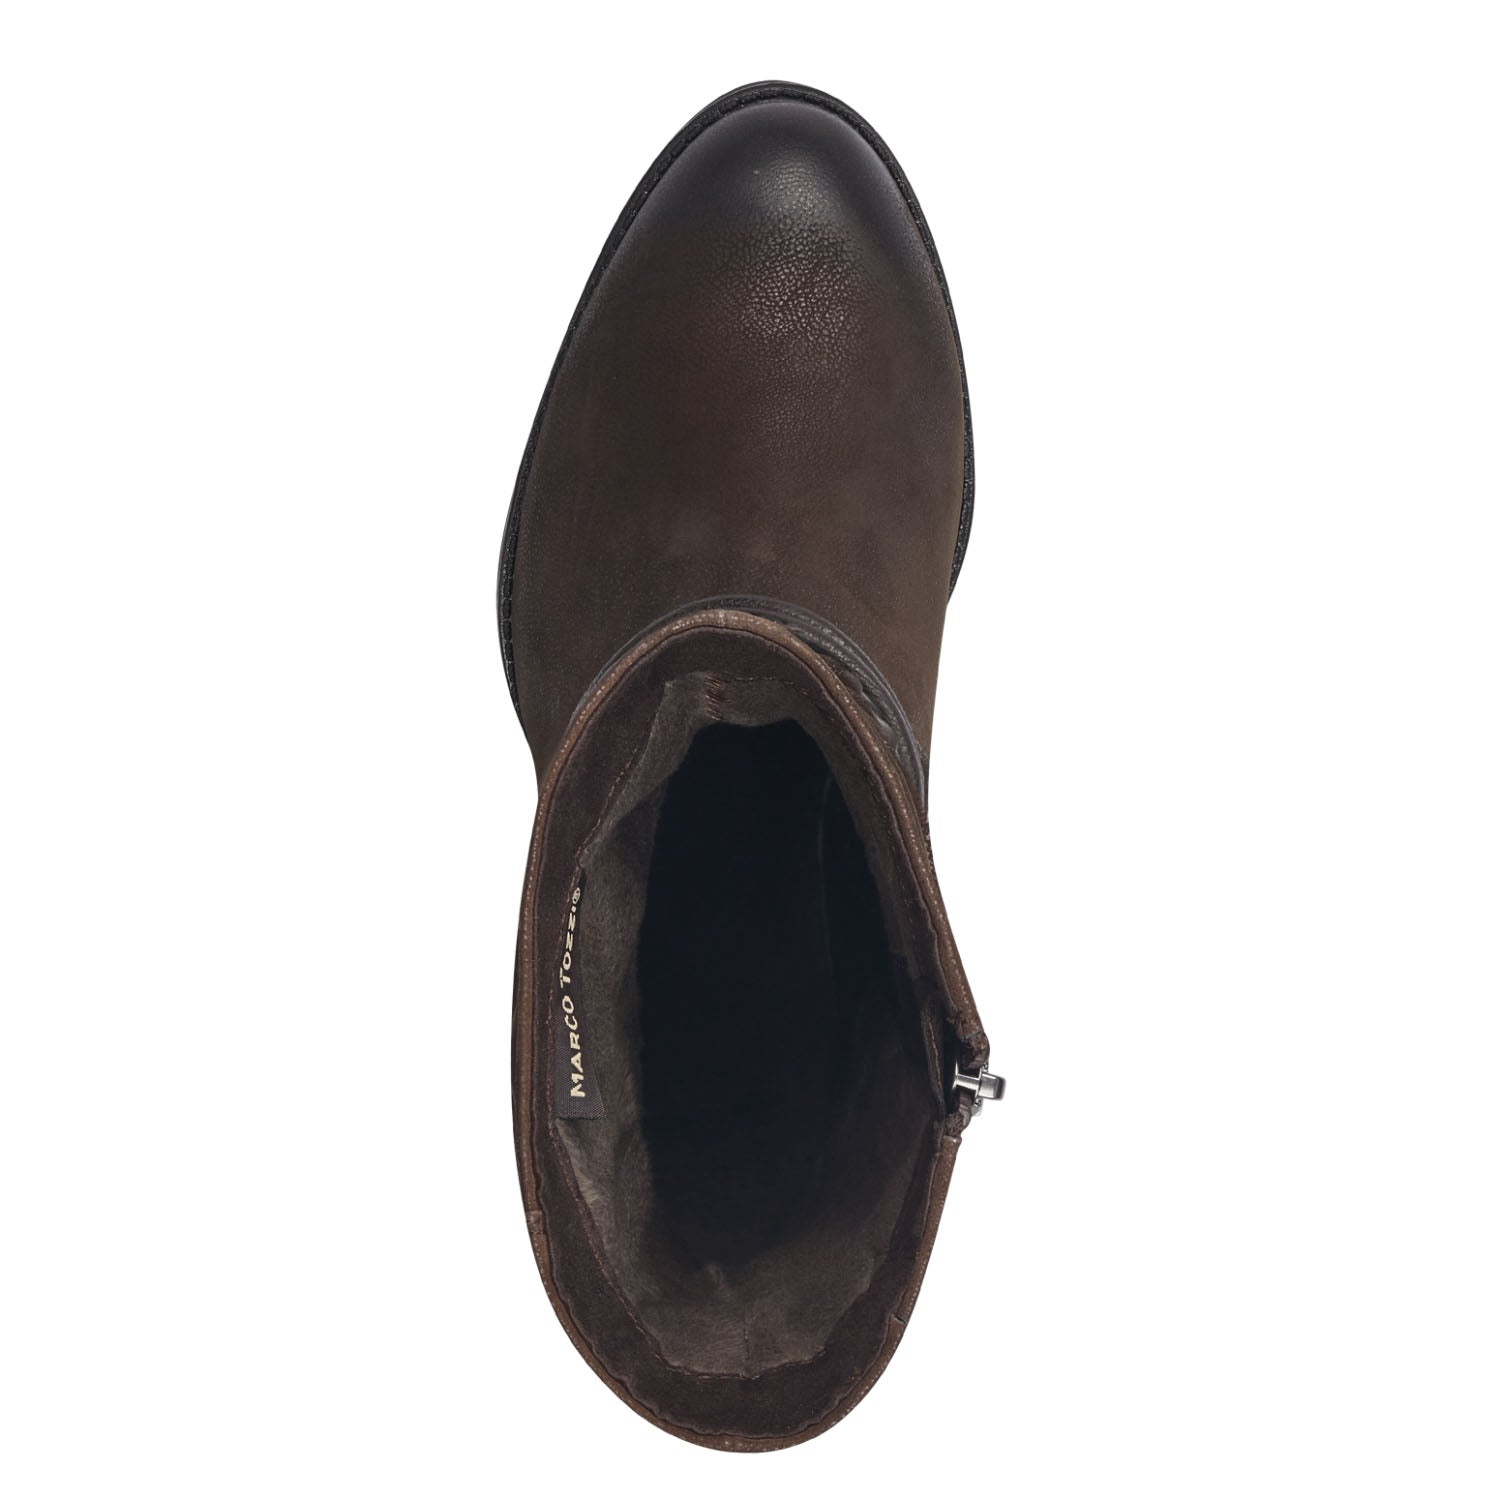 Top view of Marco Tozzi deep brown ankle boot.